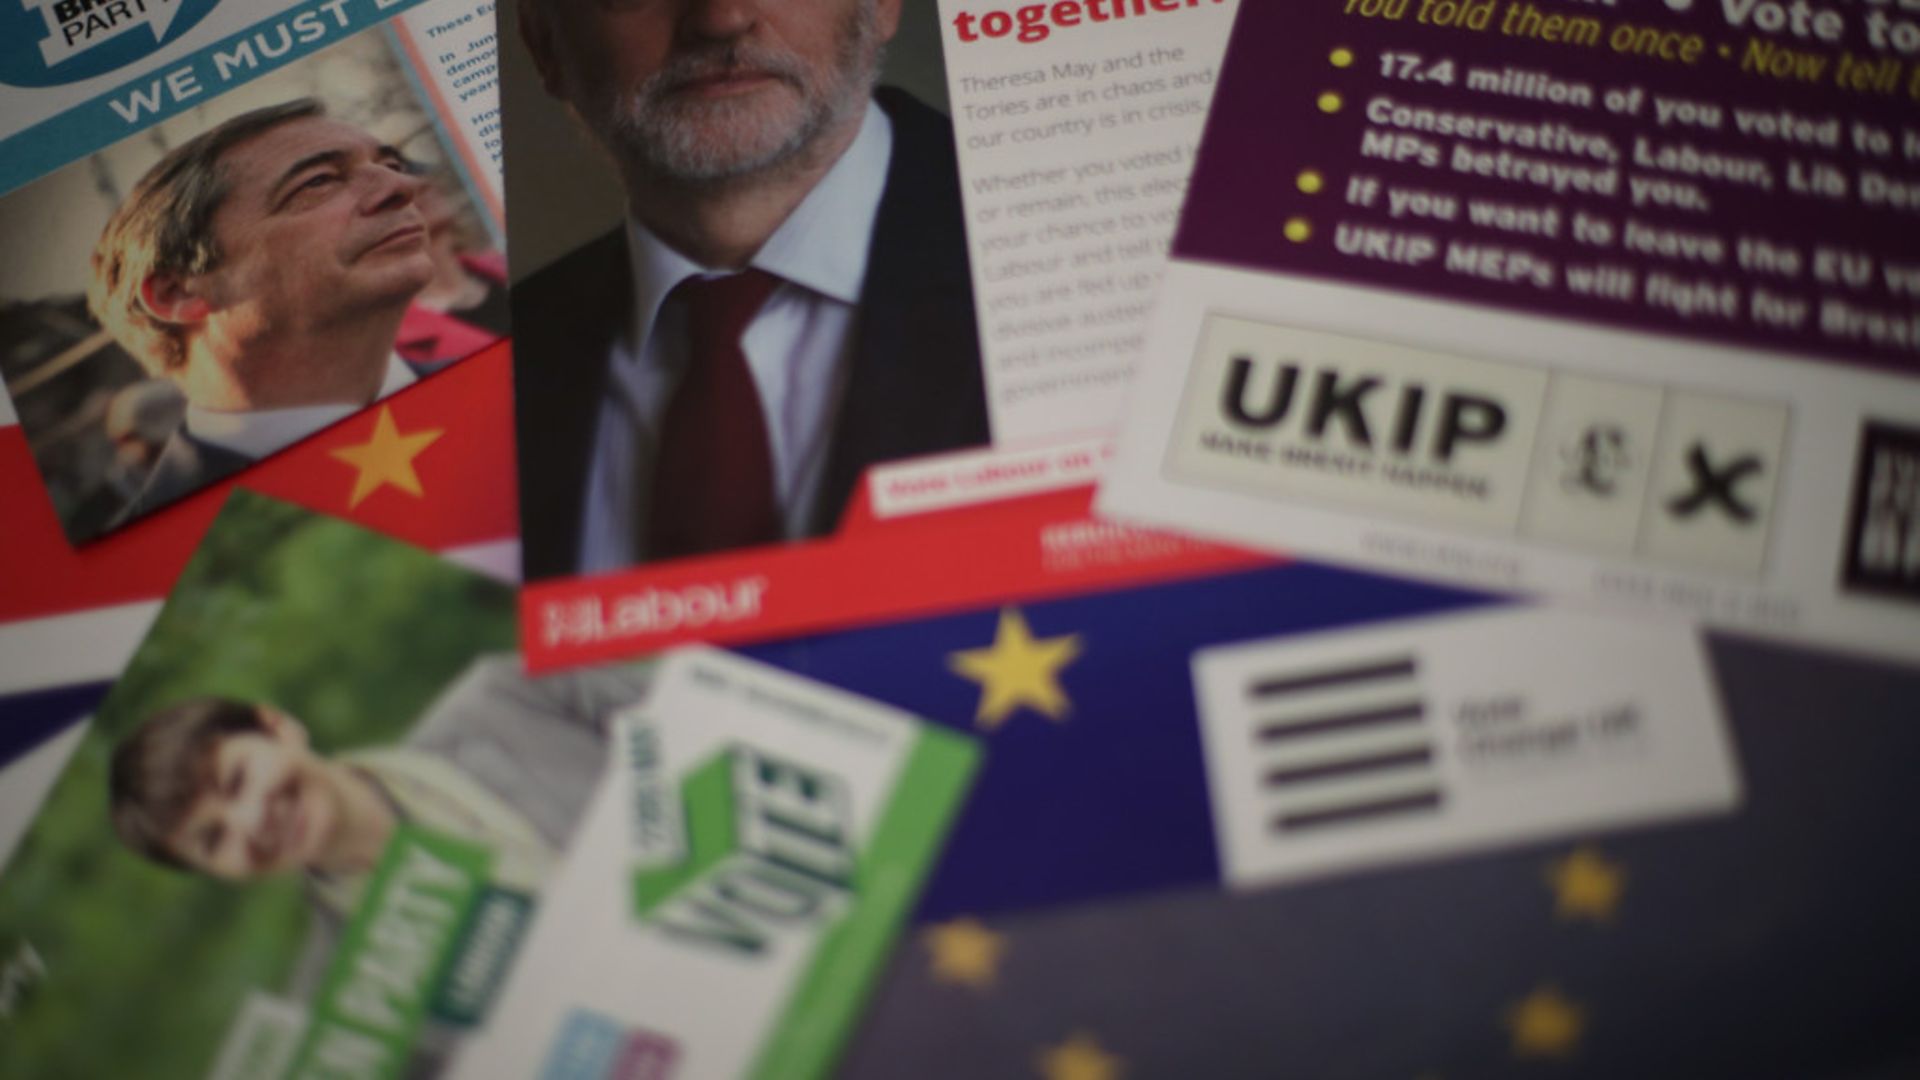 Election campaign literature from the Brexit Party, Labour, the Green Party, Change UK and UKIP for the European Parliament elections - Credit: PA Wire/PA Images